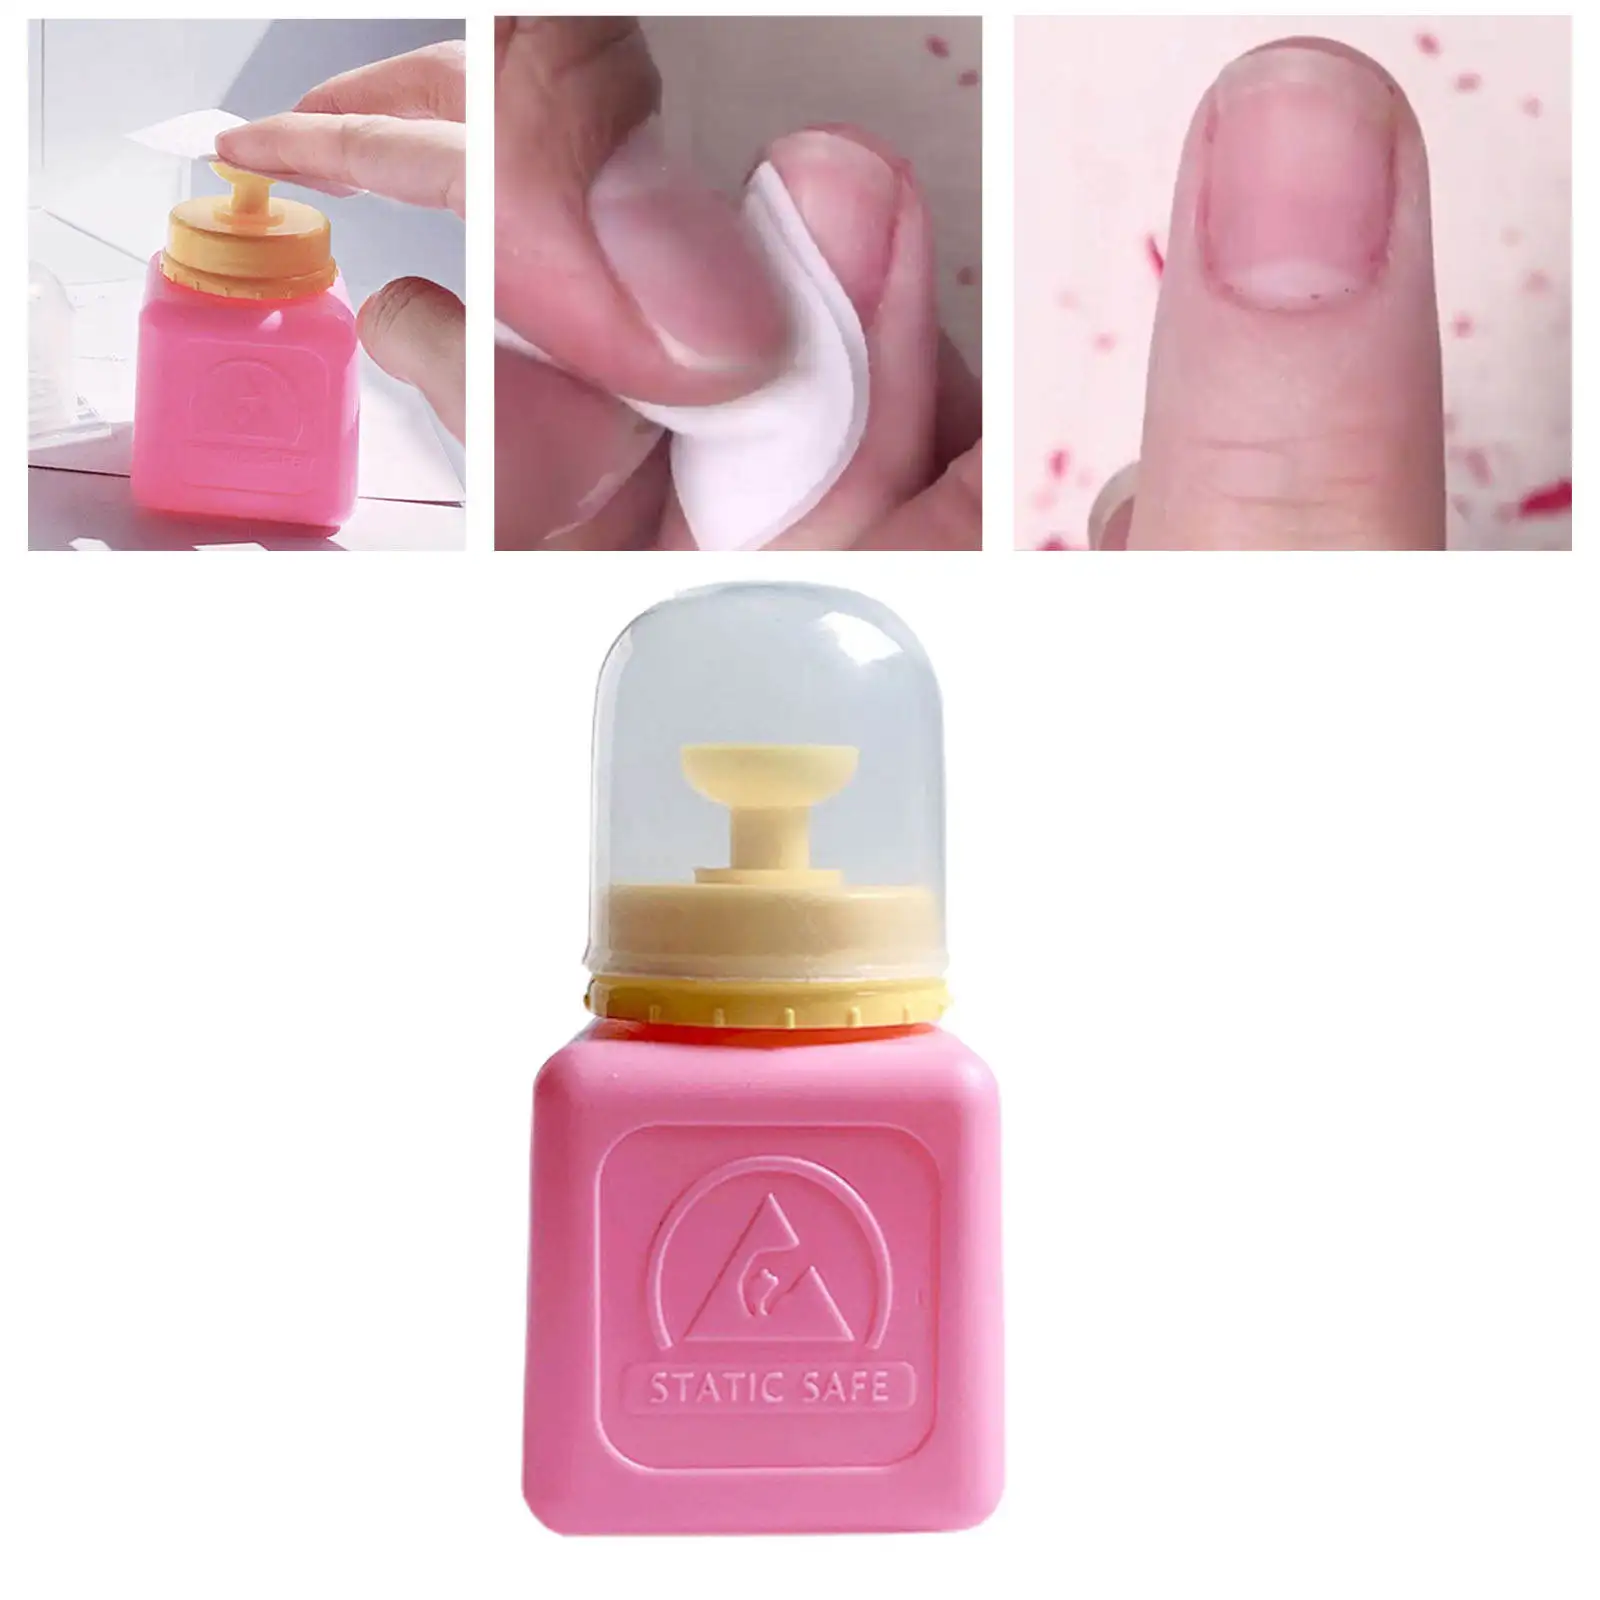 Alcohol Dispensers Press Tools Remover for Nail Polish Remover Acetone Alcohol Cosmetic